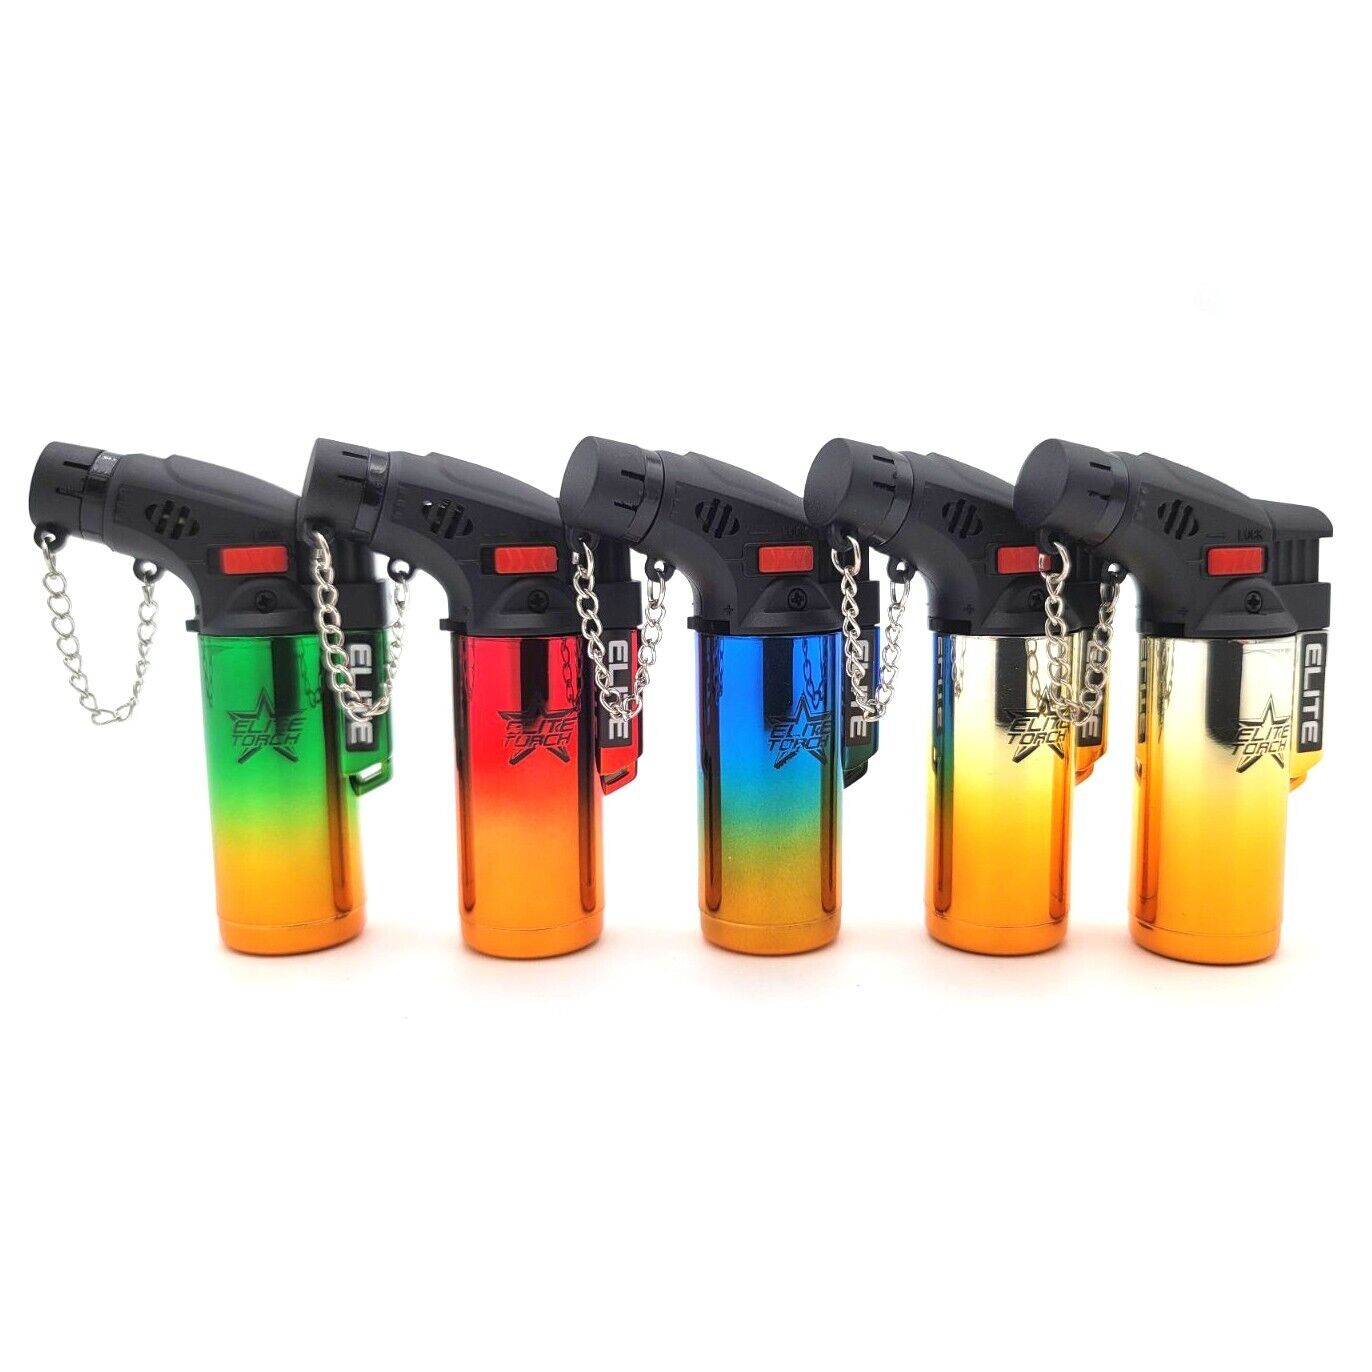 Elite Brands USA Mini Mirror Butane Gas Refillable Torch Lighters Pack of 5